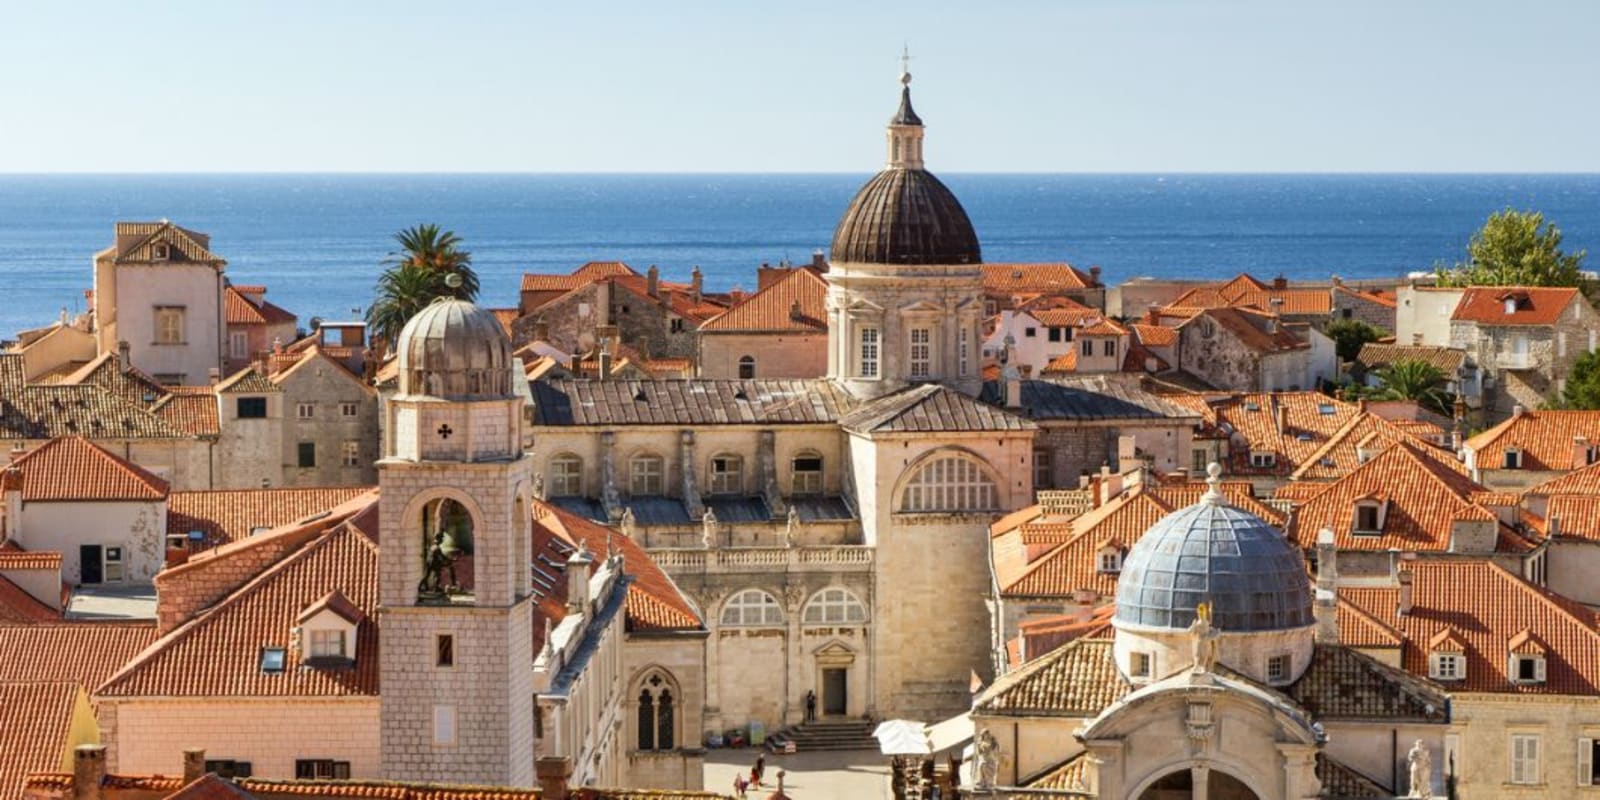 An image of Dubrovnik Old Town